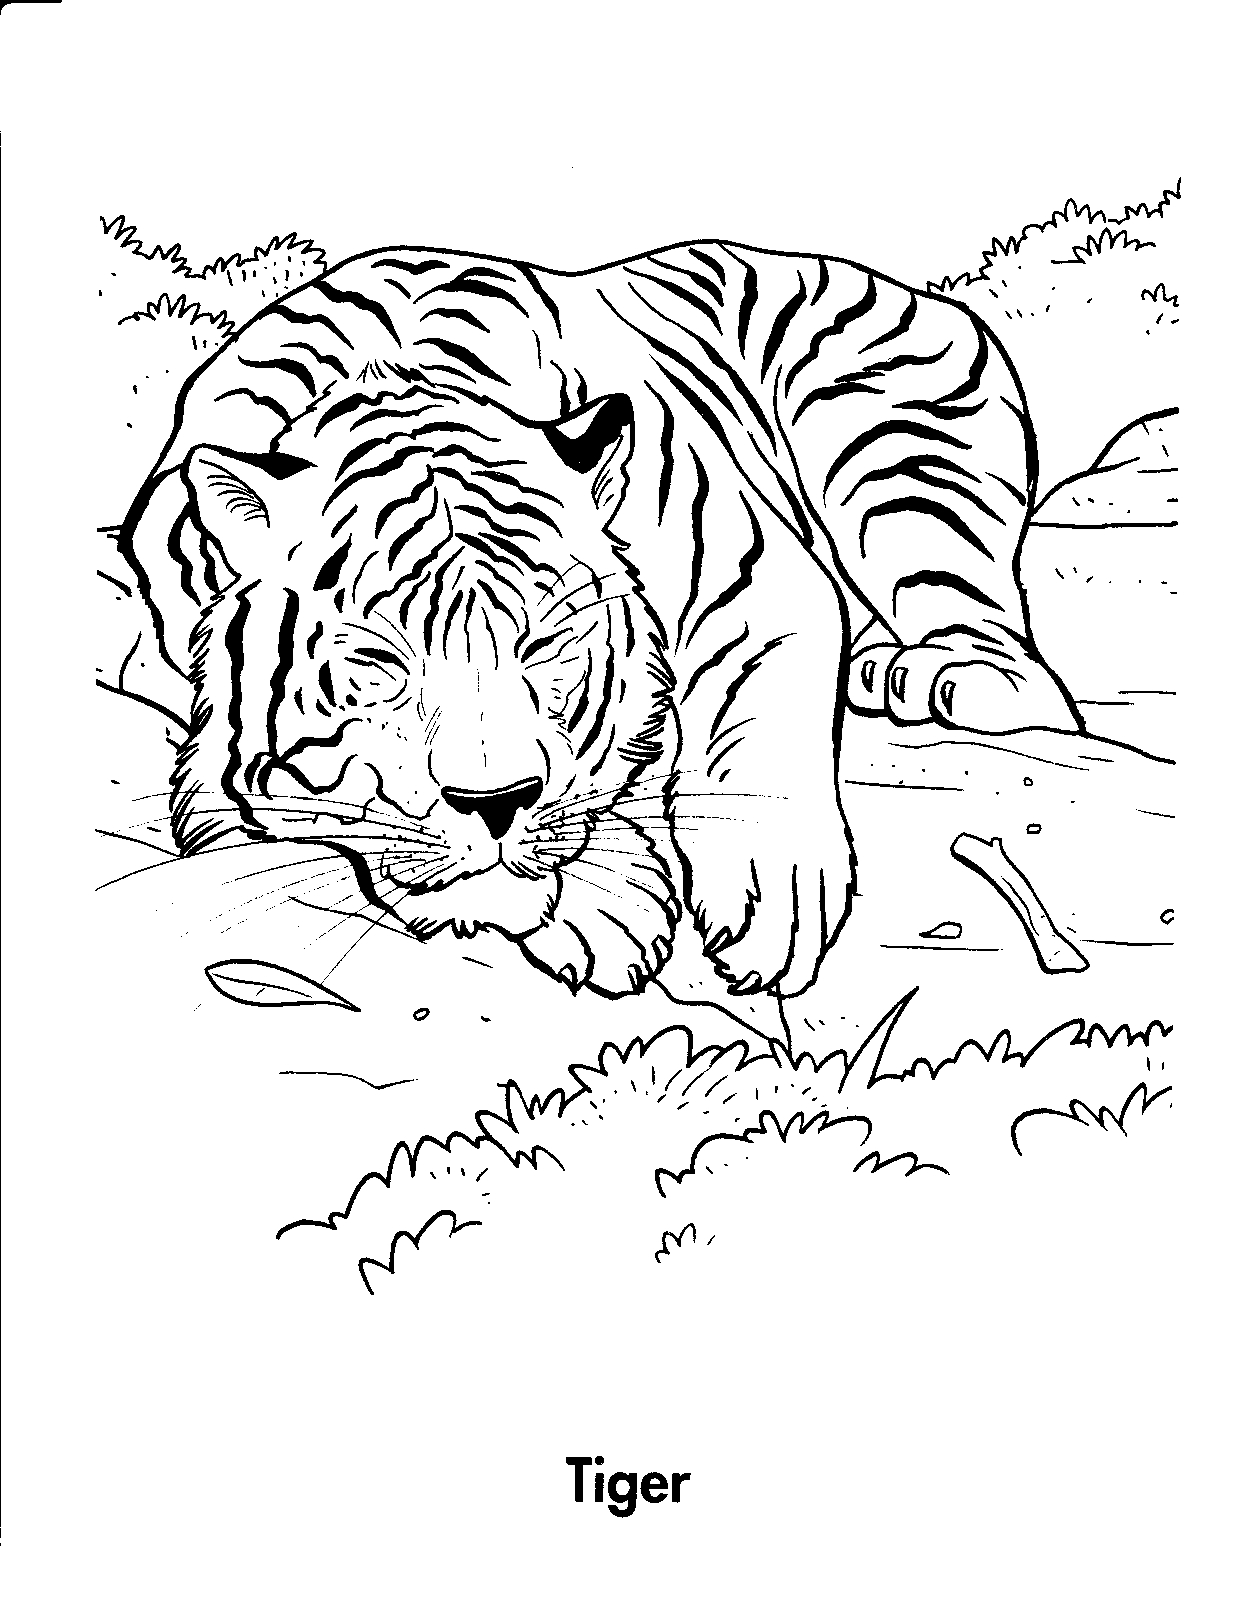  Tiger coloring pages | Animal coloring pages | #32